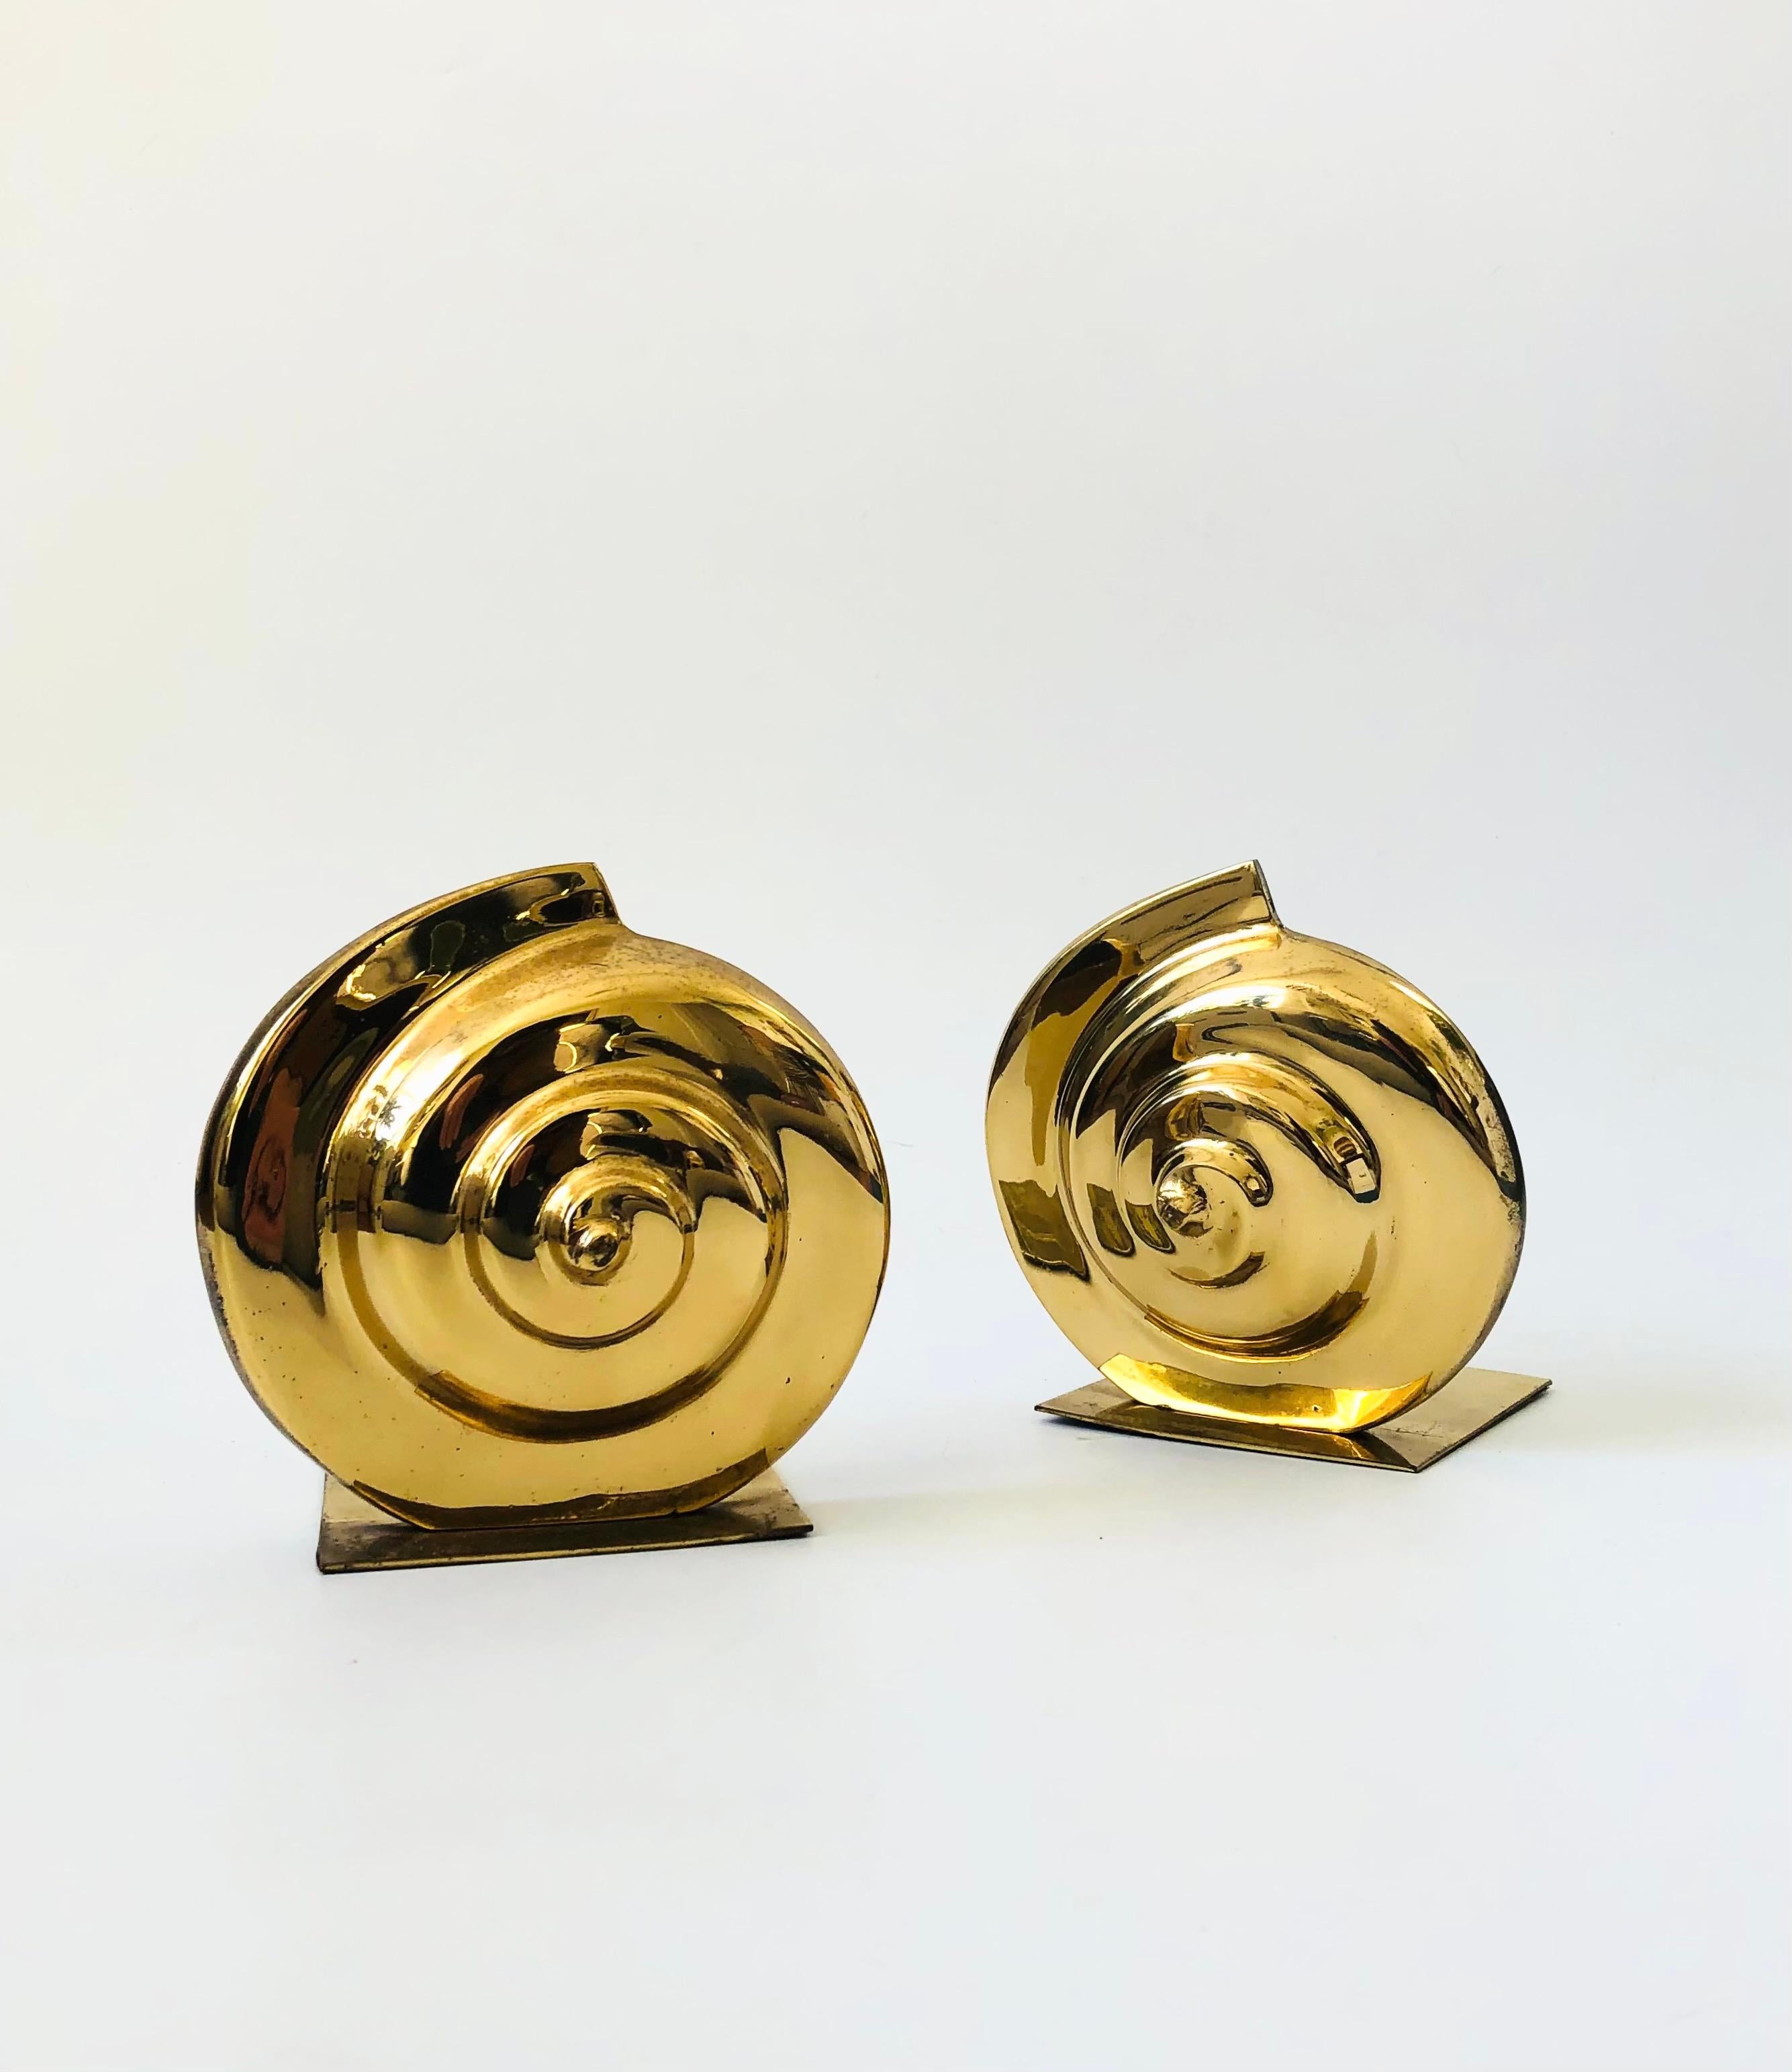 A pair of vintage brass bookends in the shape of nautilus shells. Great simplified deco shape with nice heavy weights. Felted bases.

